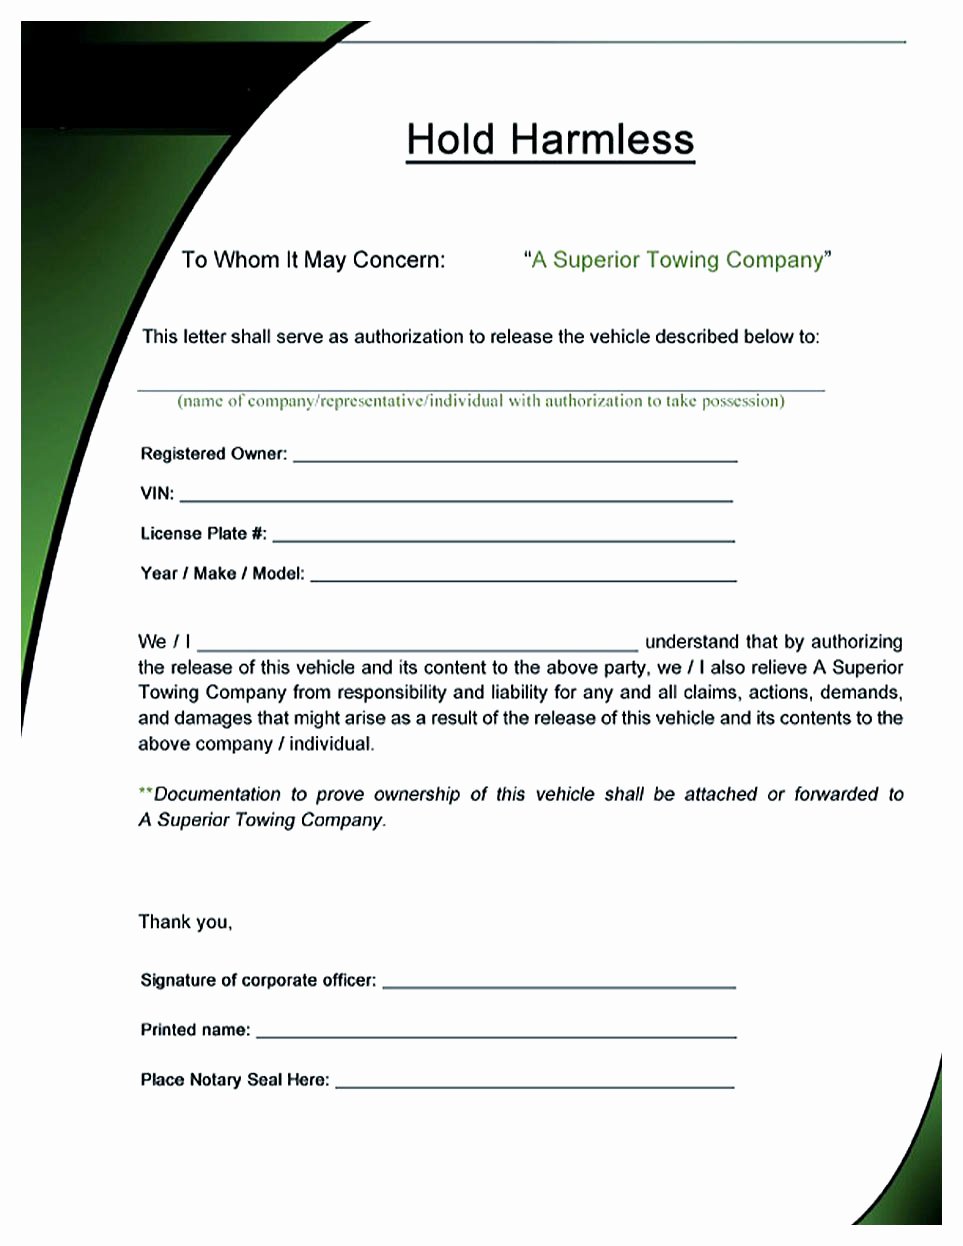 Hold Harmless Agreement Template Awesome Making Hold Harmless Agreement Template for Different Purposes